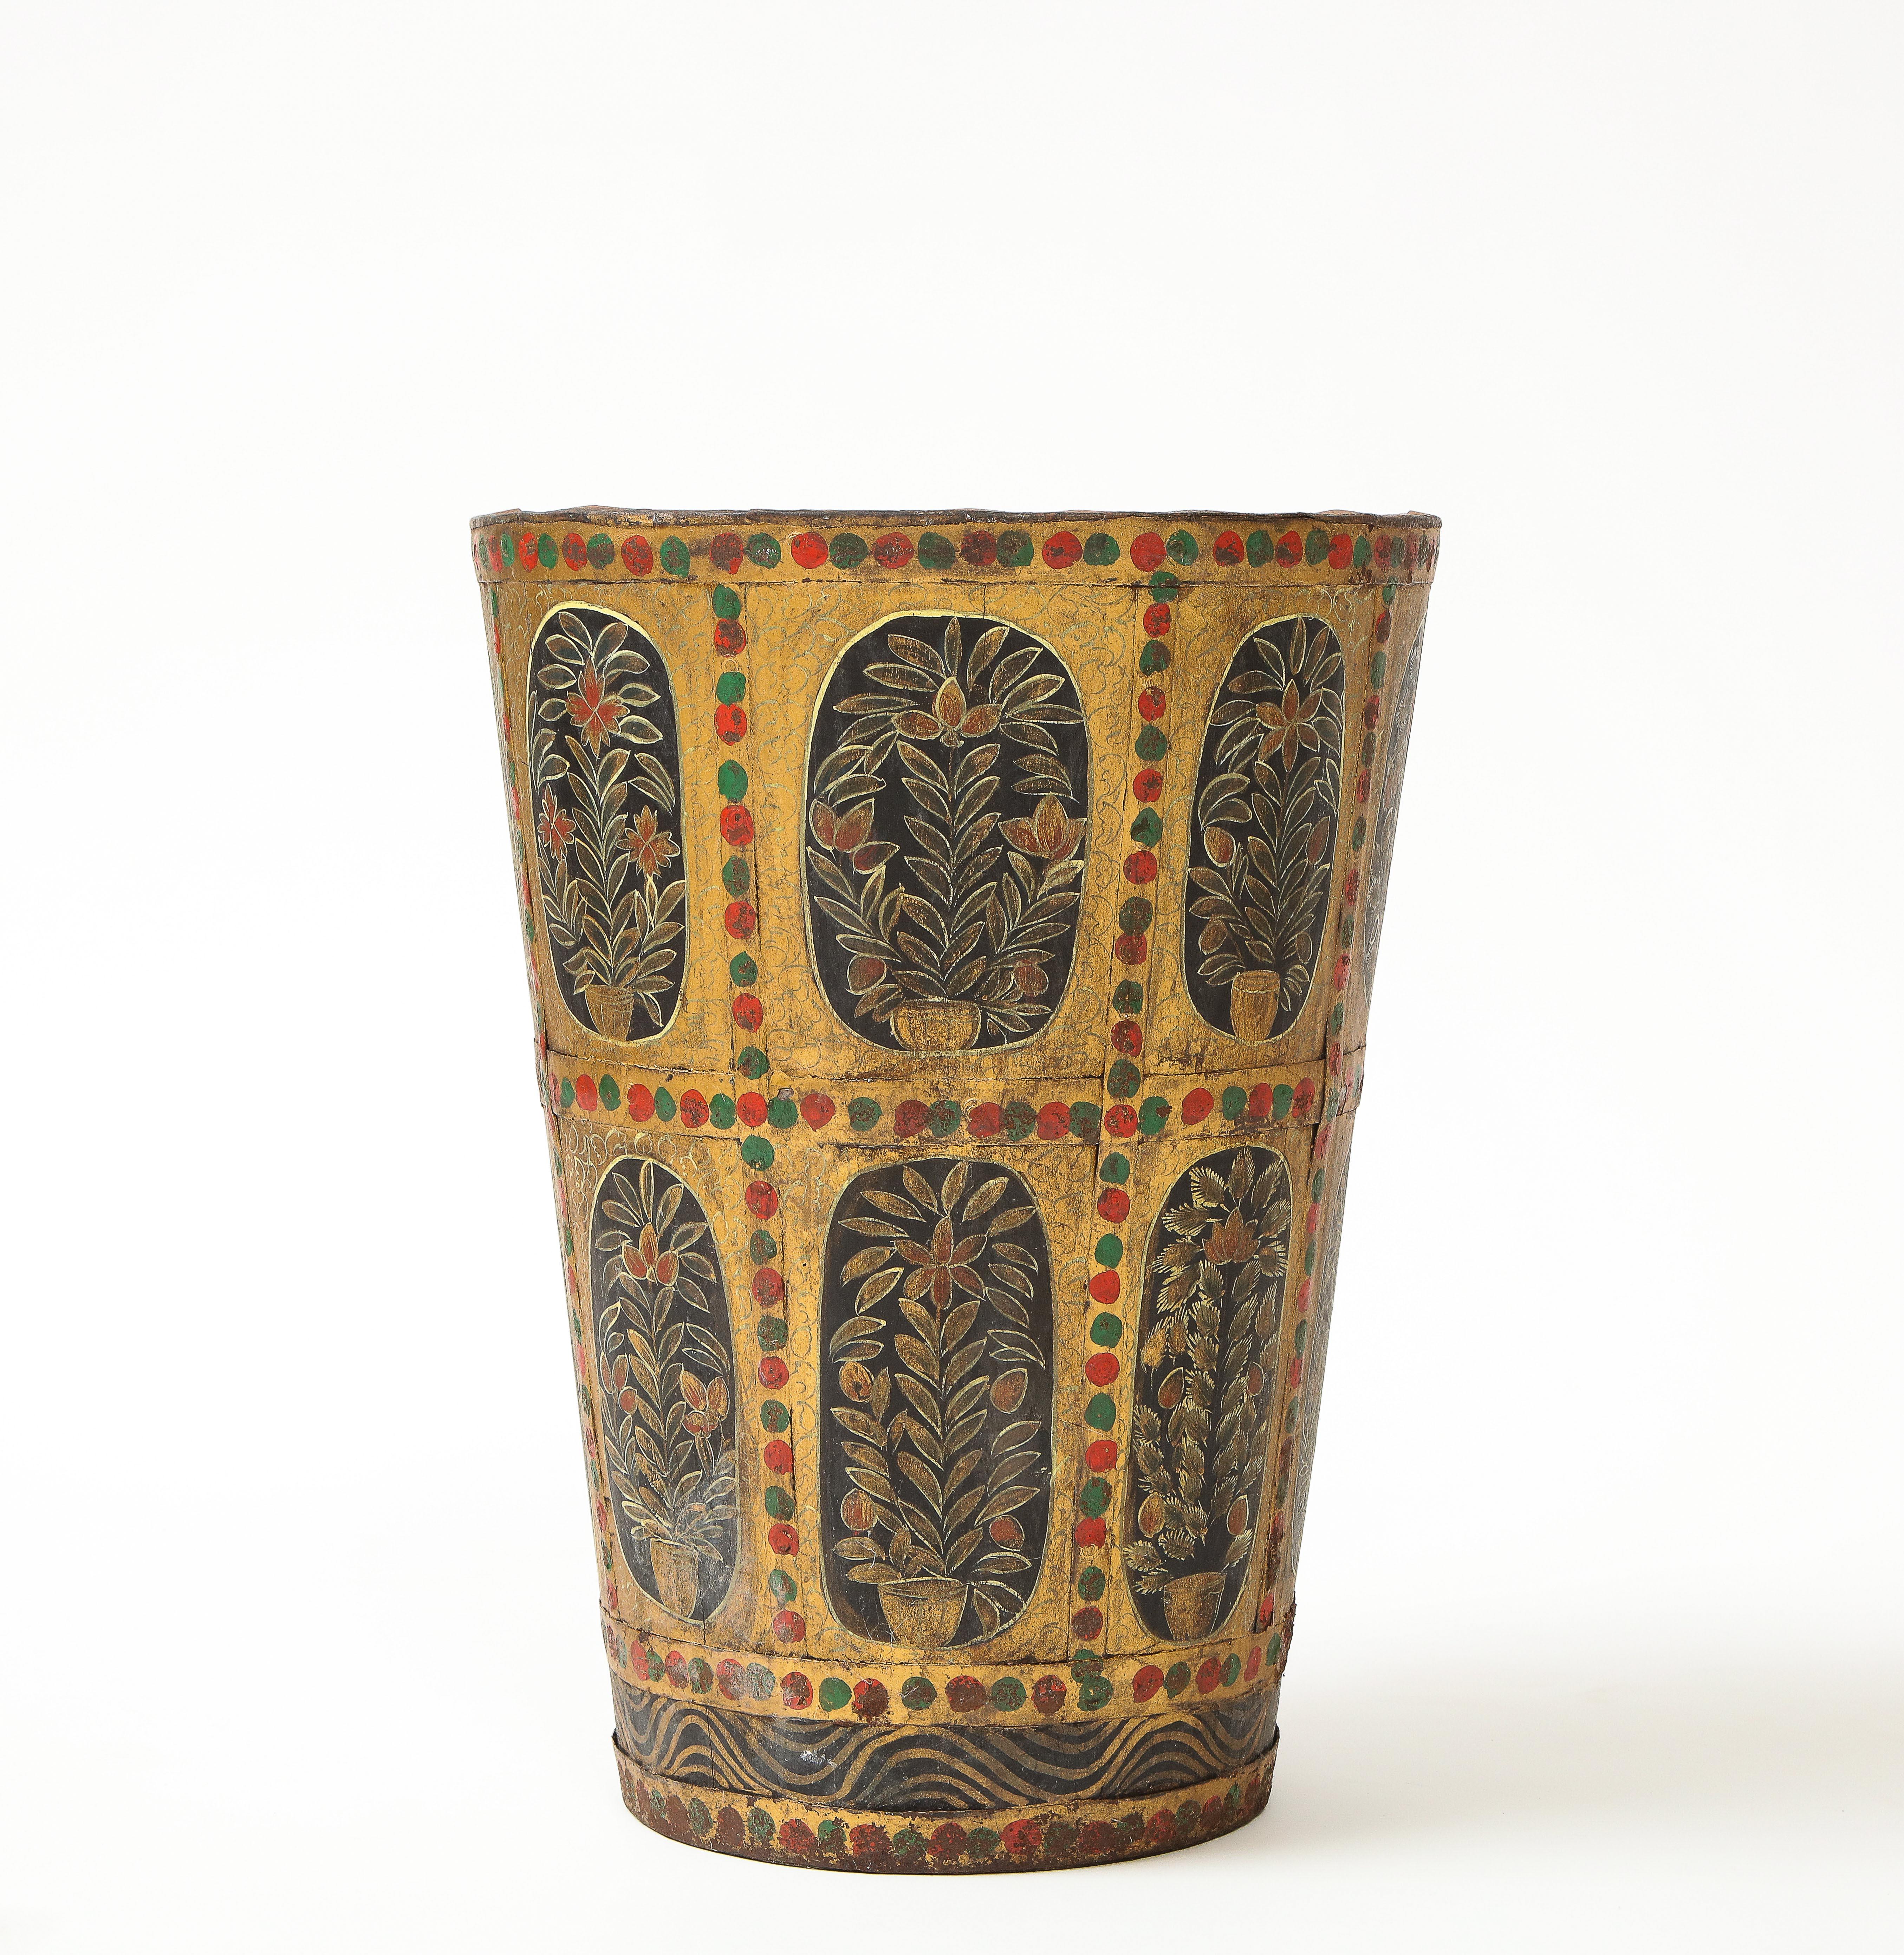 Decorated overall in incised gold-wash and black ground cartouches enclosing potted trees overlaid with metal banding painted with alternating red and green dots. Could also be used as a waste basket.